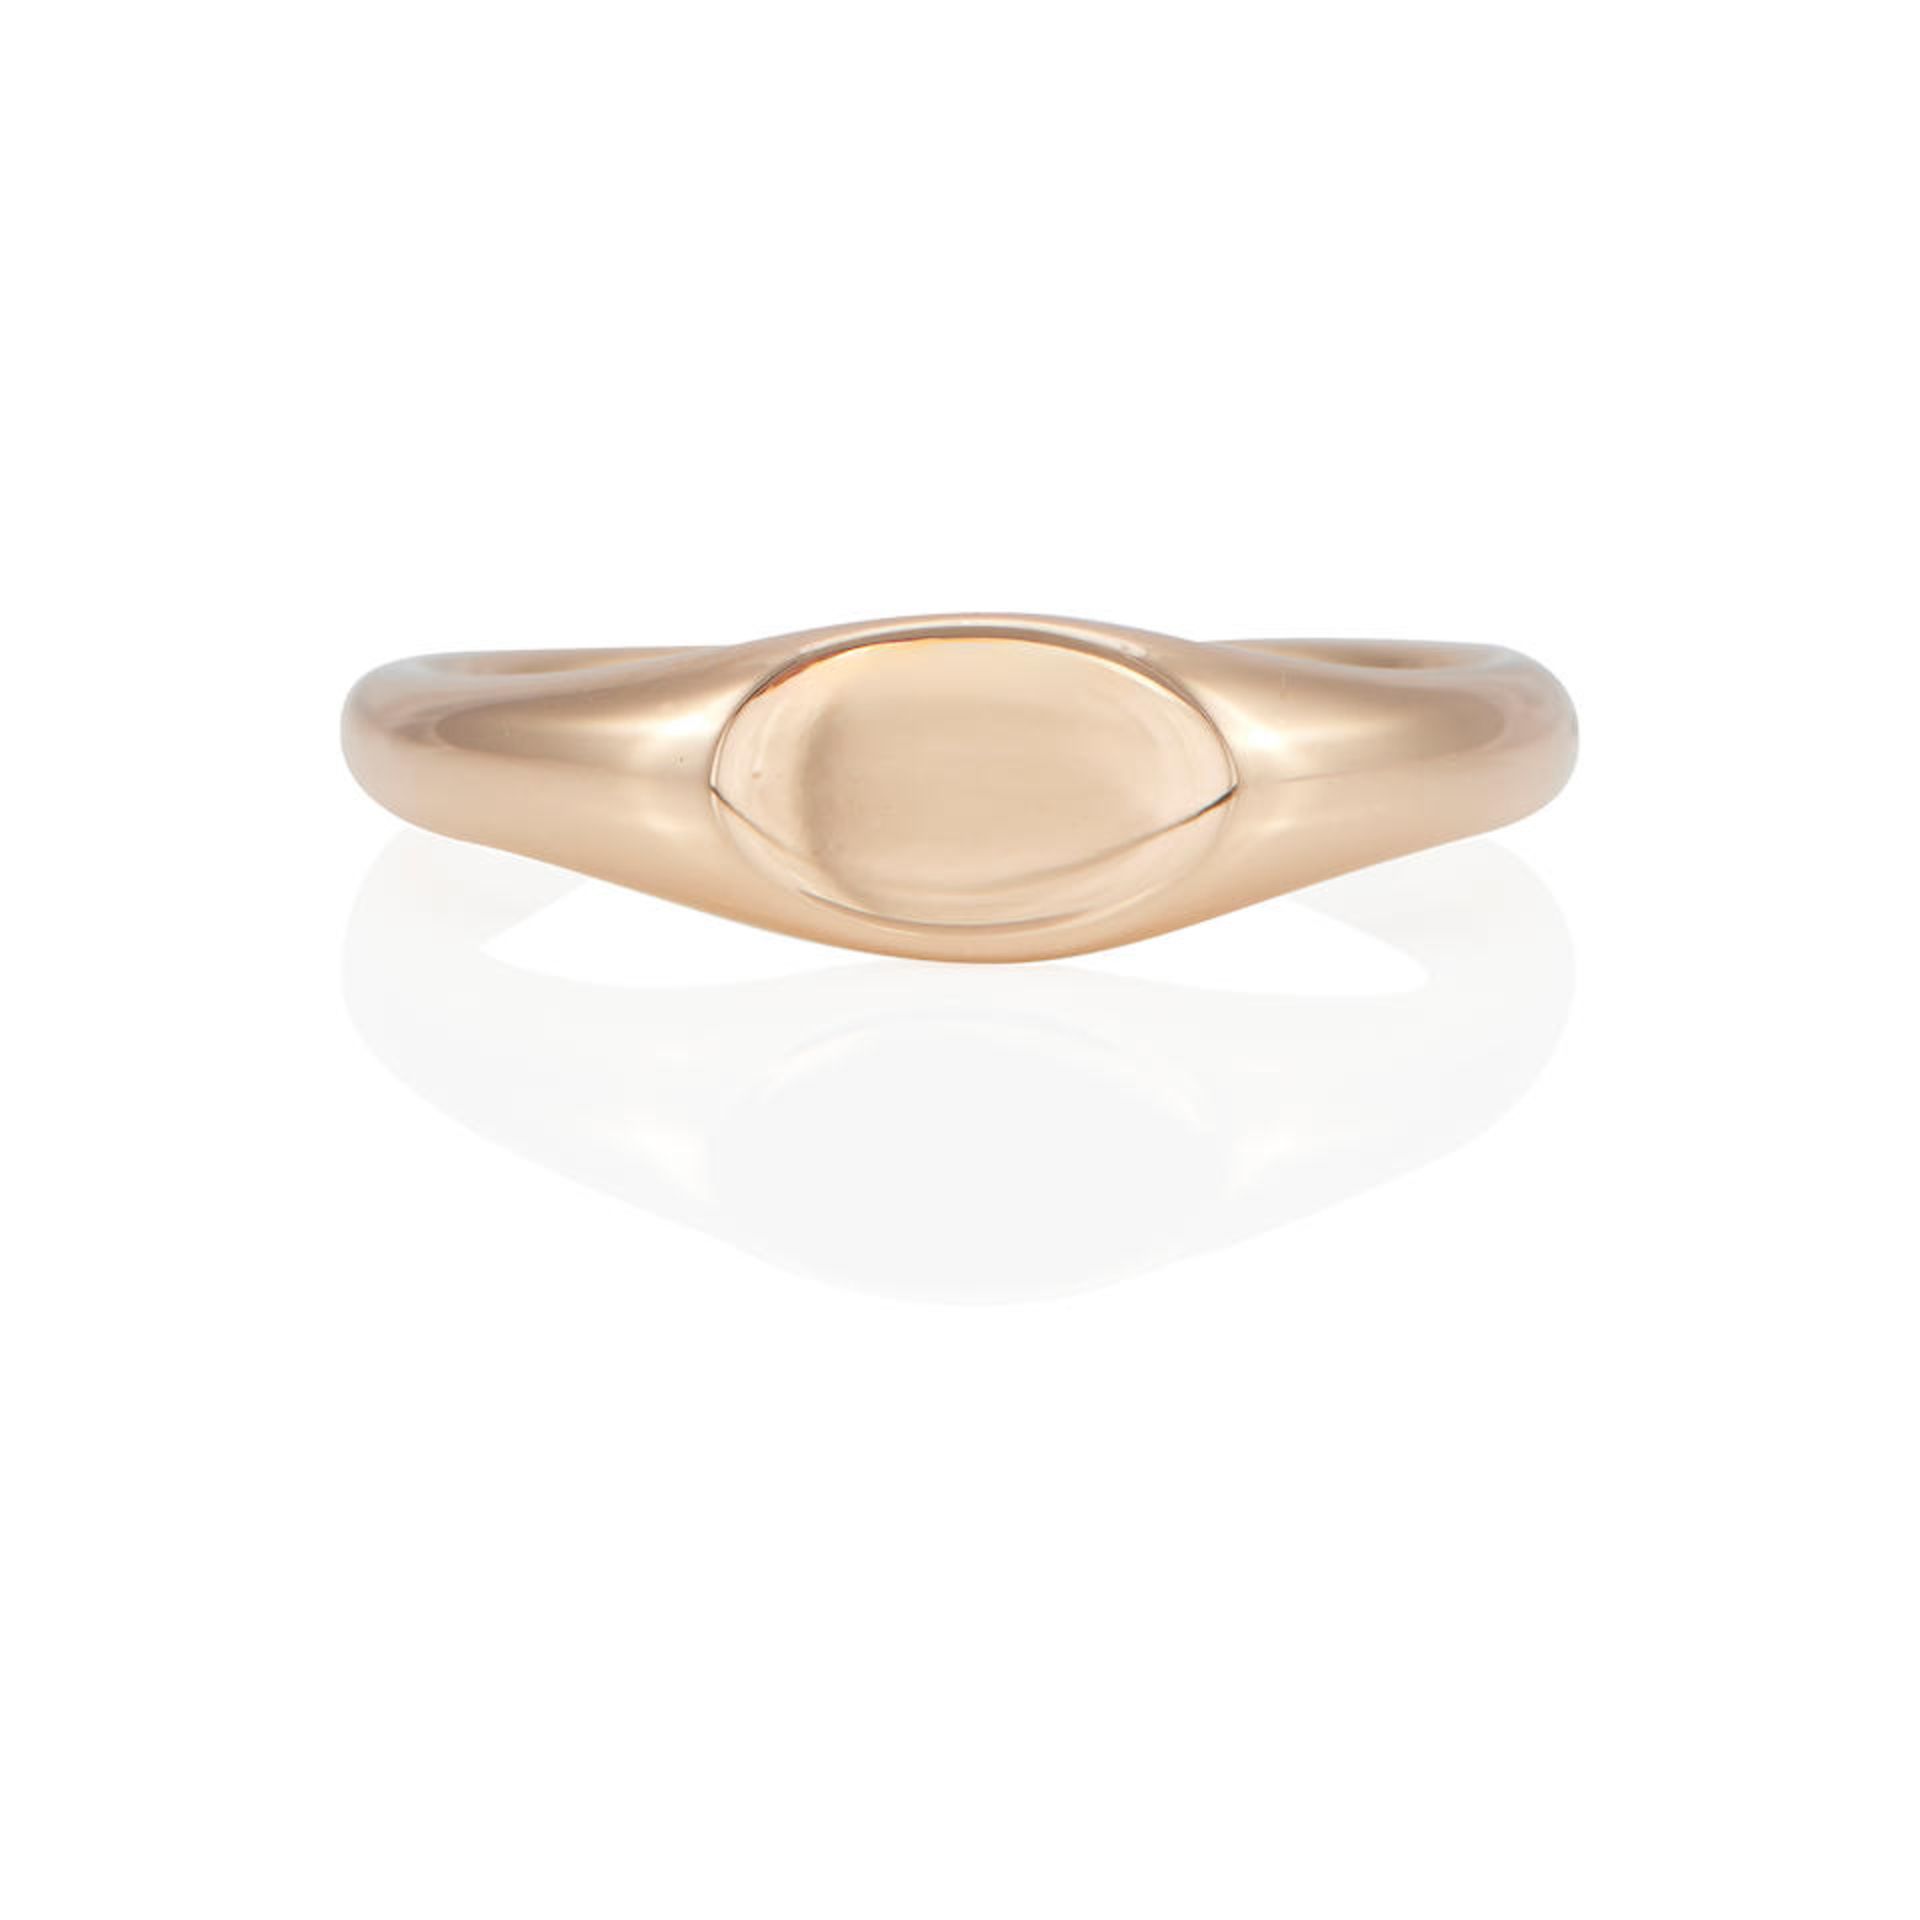 TIFFANY & CO.: AN 18K GOLD OVAL SIGNET RING